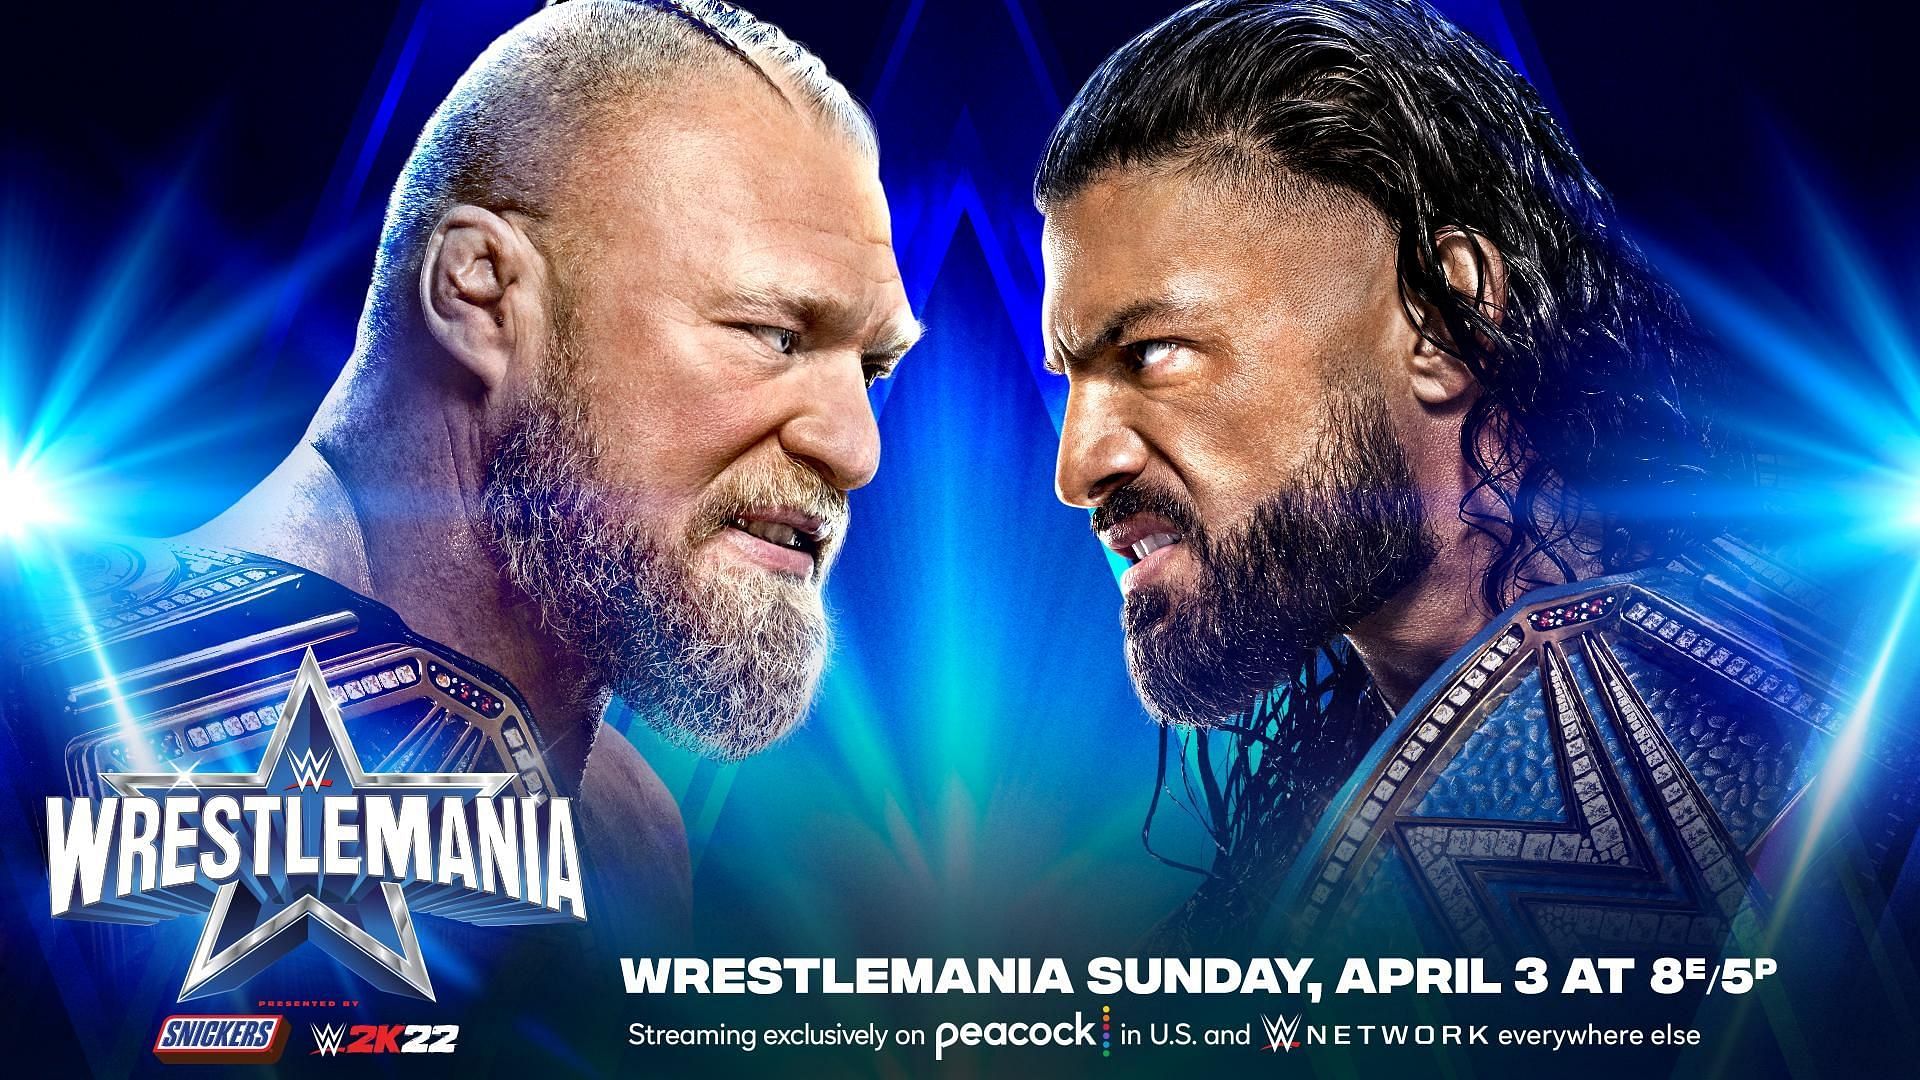 Brock Lesnar and Roman Reigns will compete on WrestleMania Sunday